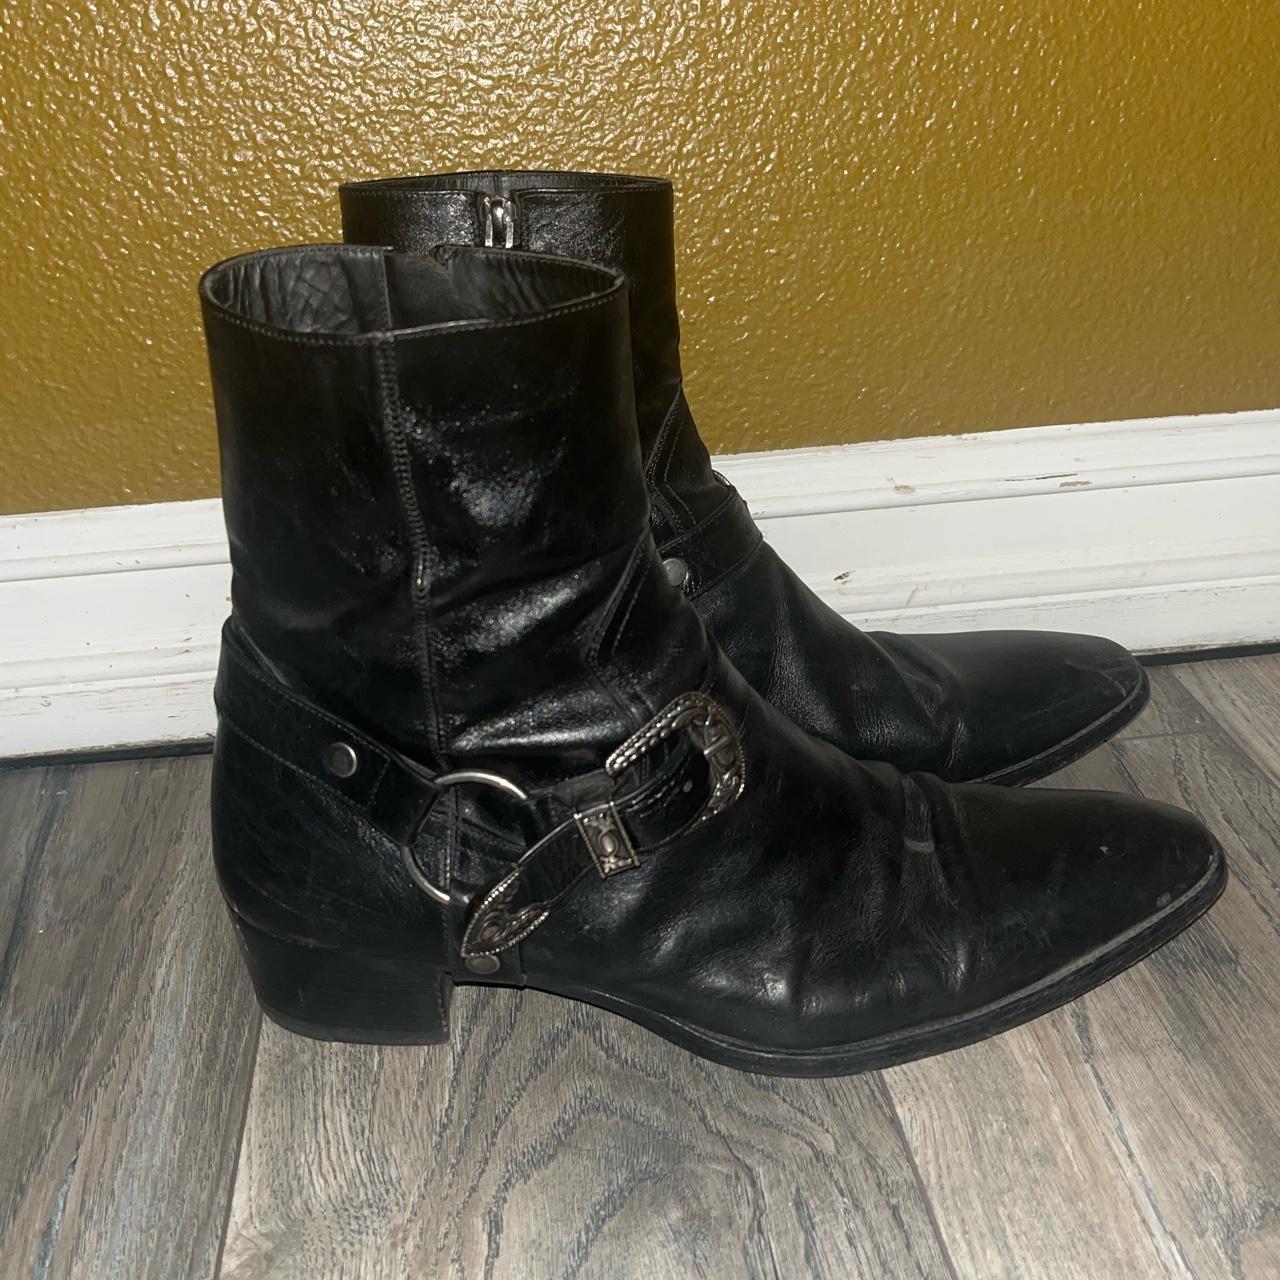 YSL western style boot. Super comfy. Used but I’m... - Depop